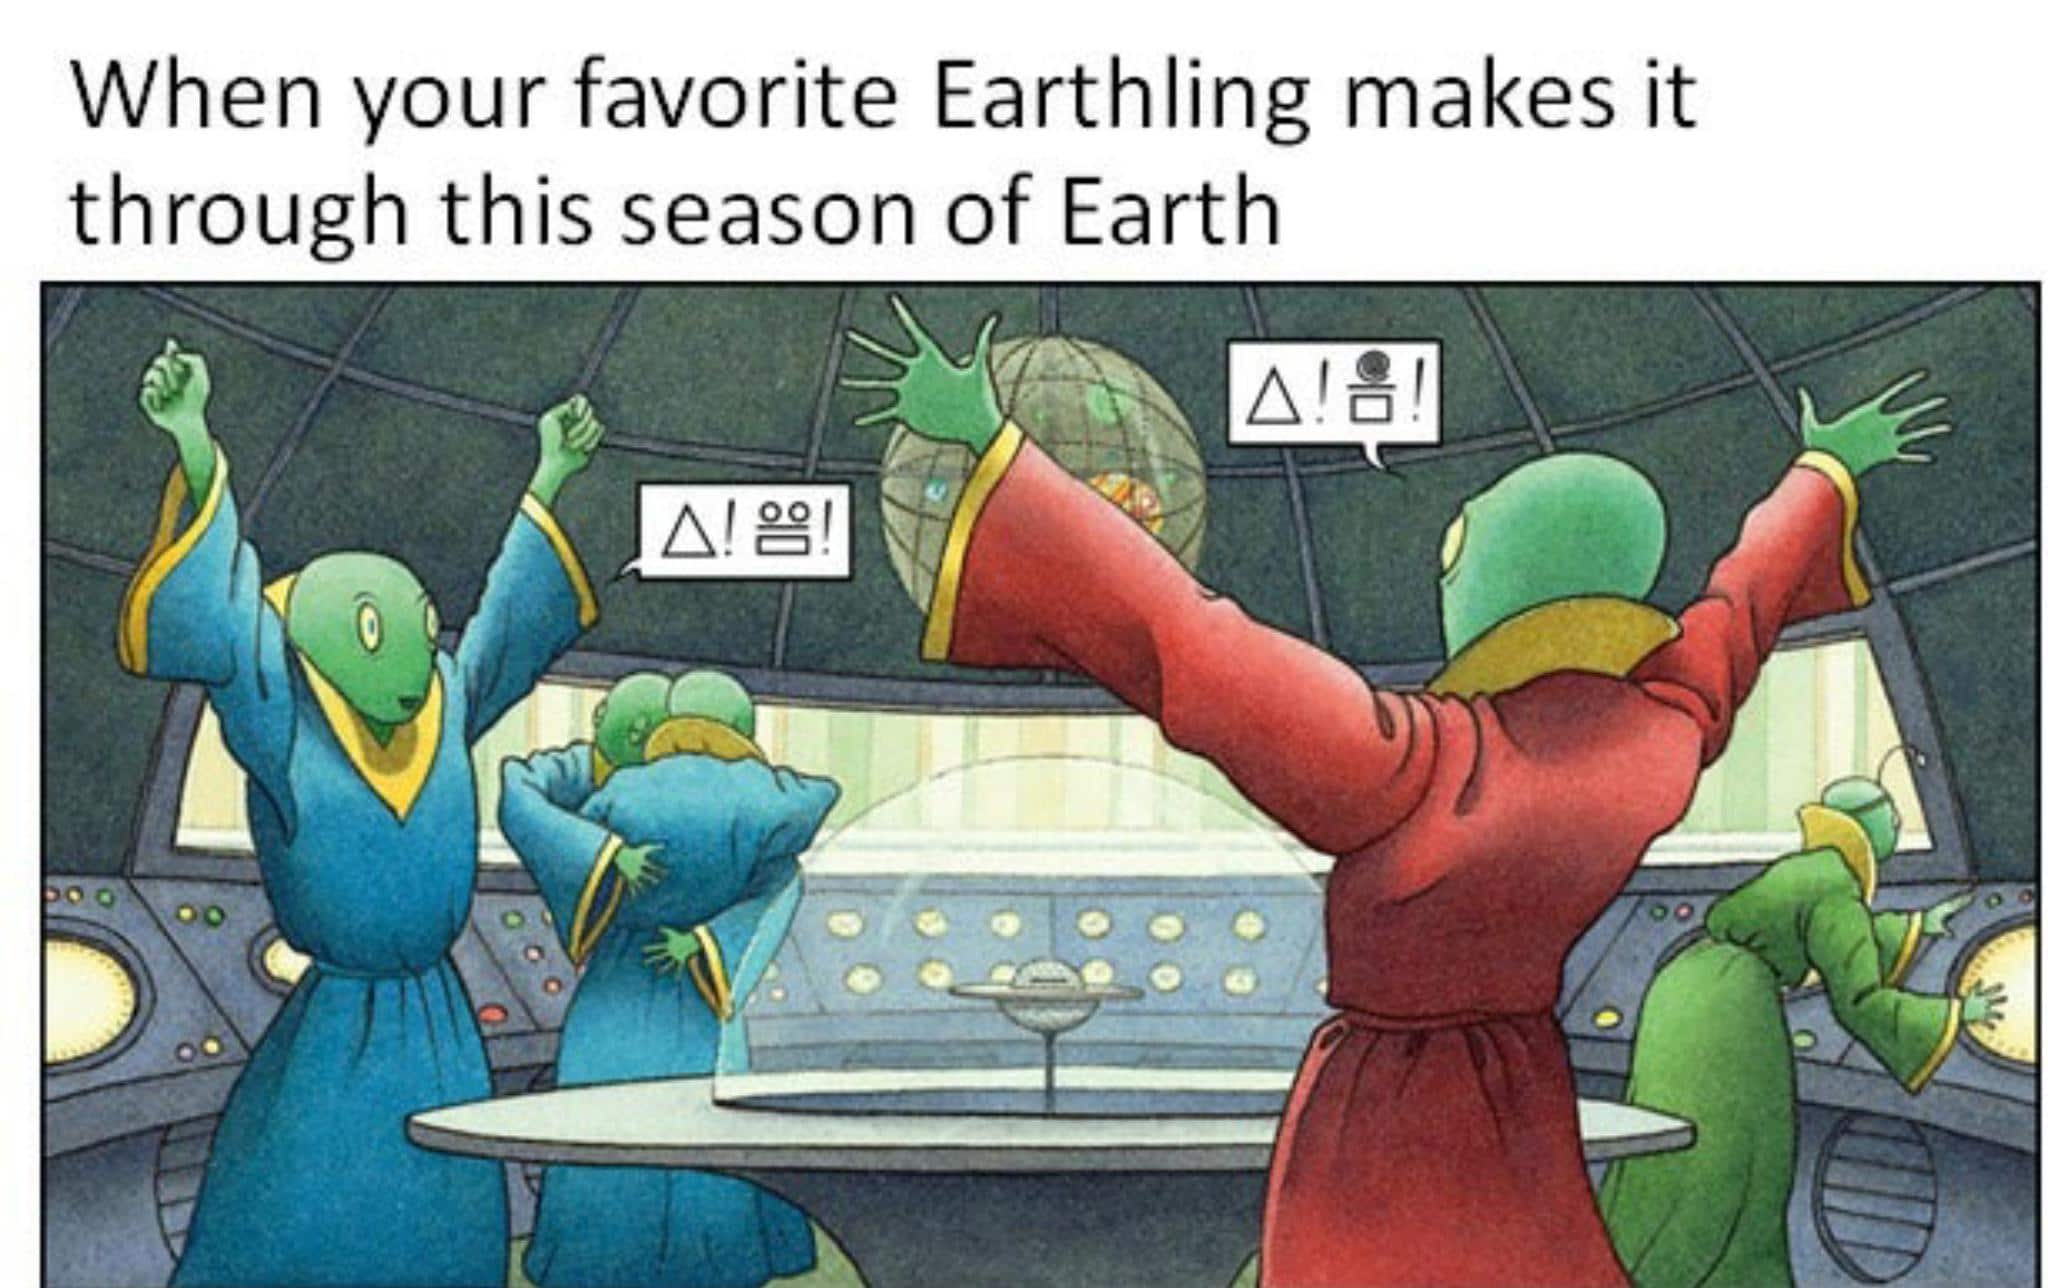 Wholesome memes, Fuck, Earth, Earthling, Mr, Alien Wholesome Memes Wholesome memes, Fuck, Earth, Earthling, Mr, Alien text: When your favorite Earthling makes it through this season of Earth 00 